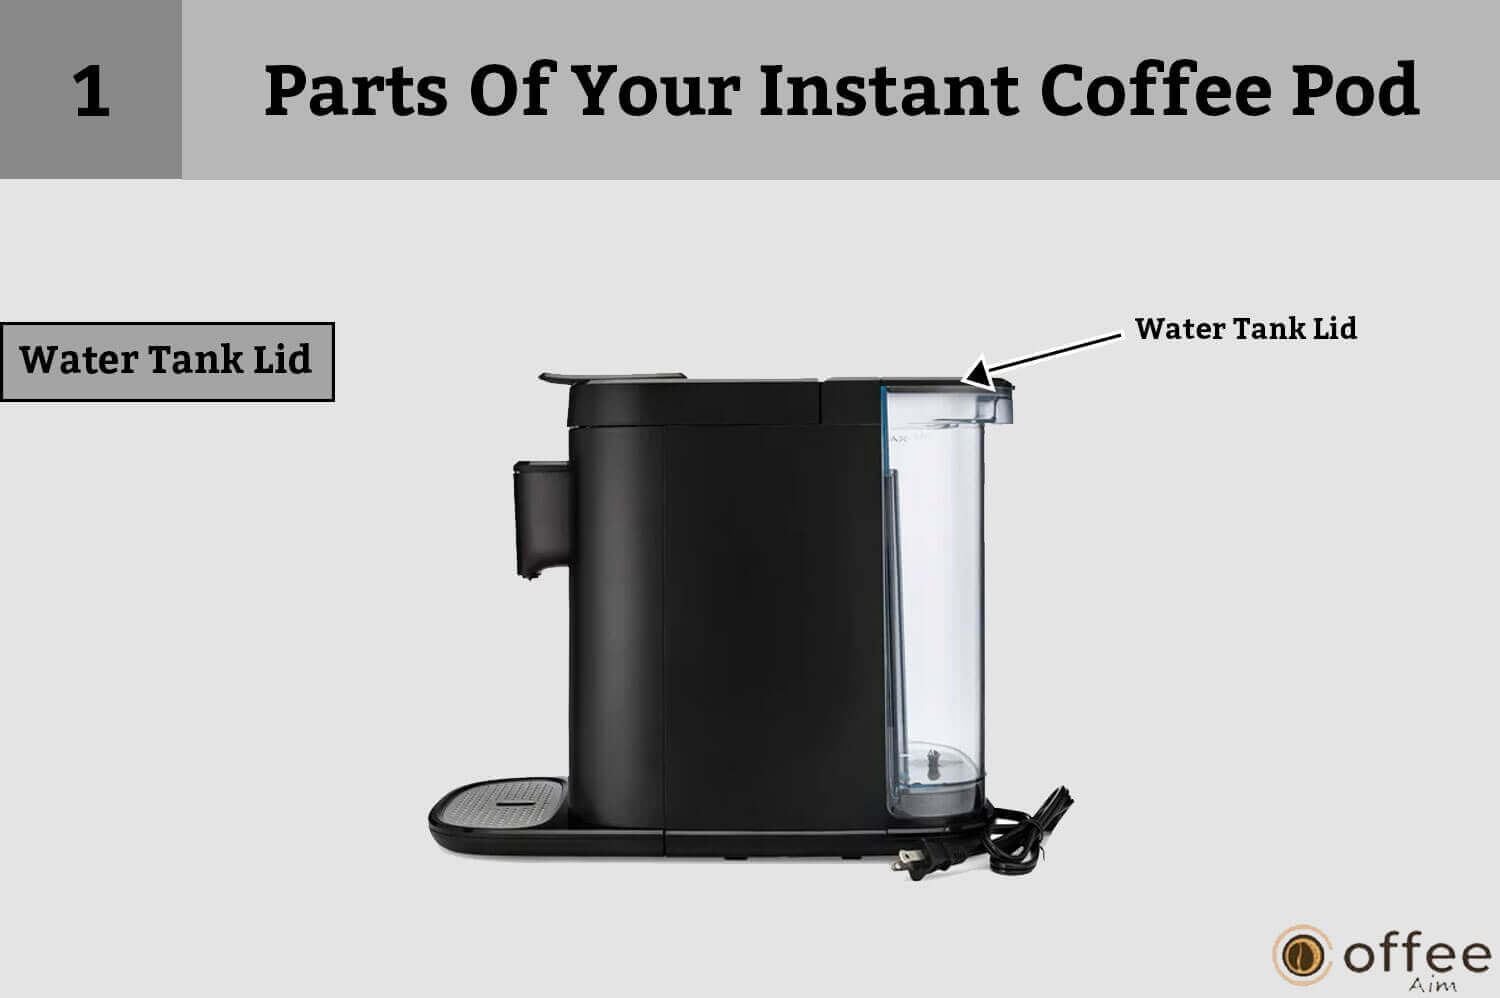 This image depicts the "Water Tank Lid" as part of the "Parts of Your Instant Coffee Pod" section in our article "How to Connect Nespresso Vertuo Creatista Machine."